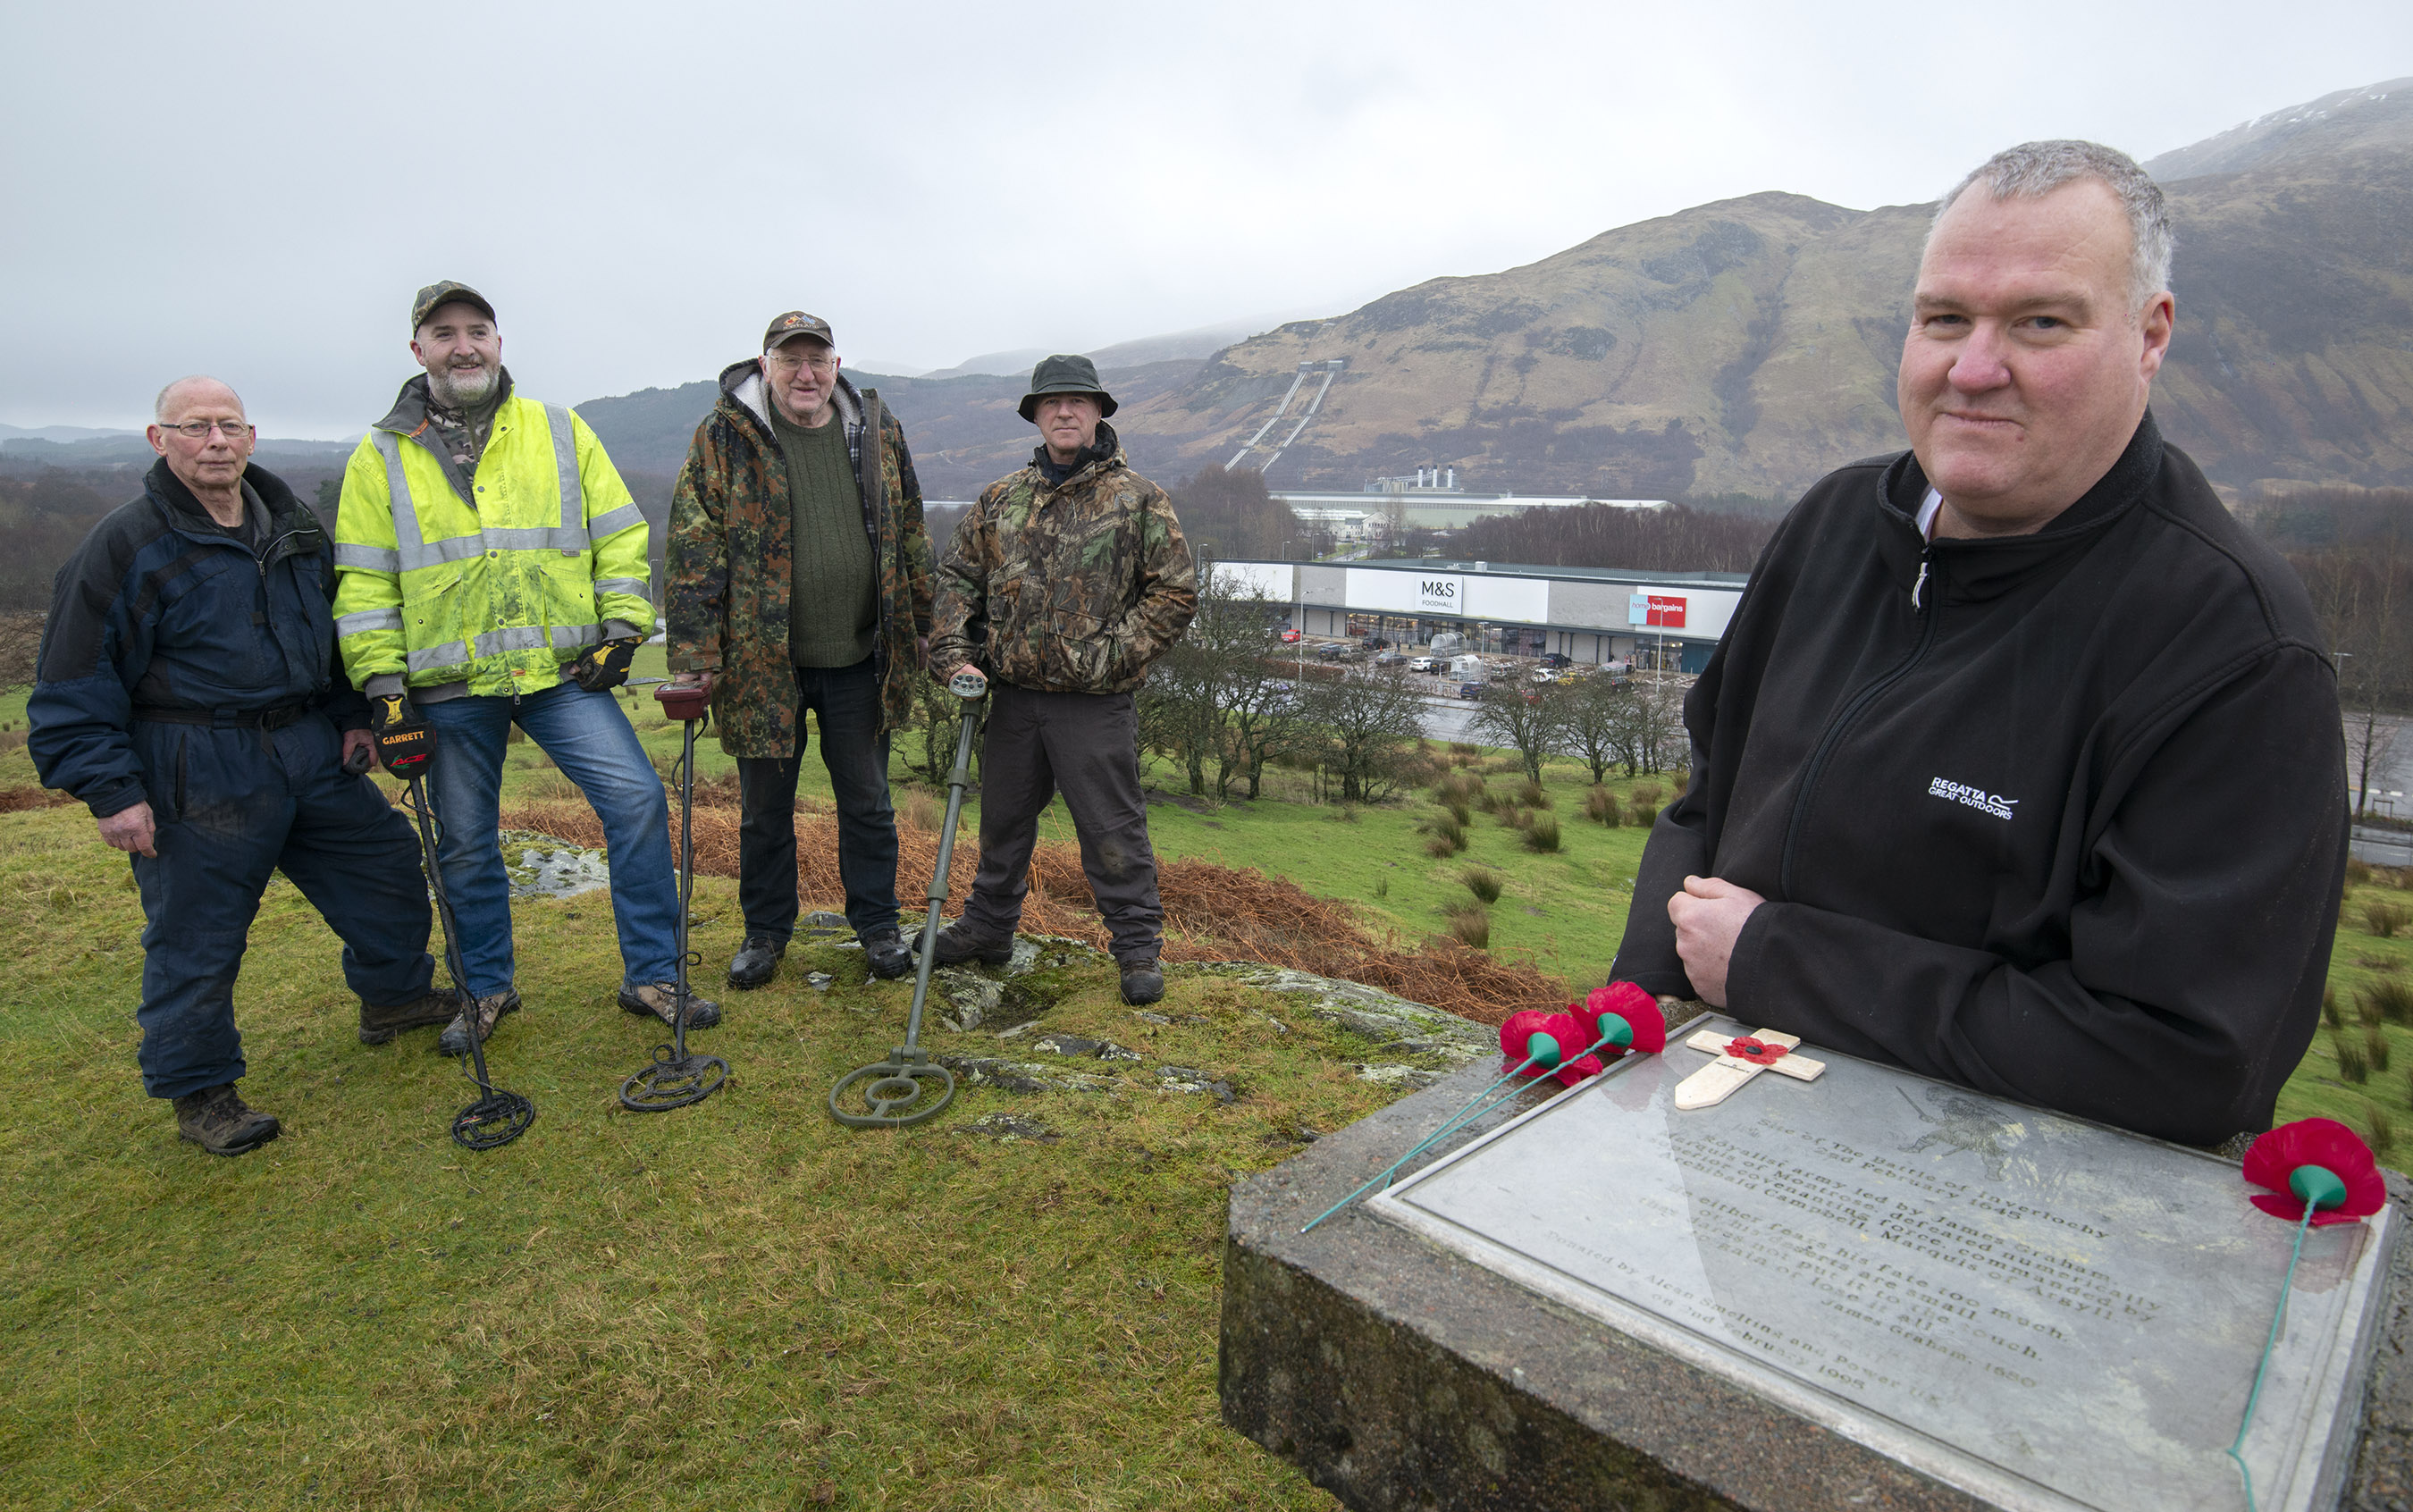 Lochaber Historian Robert Cairns (right) with a group of metal detectorists mark the 350th anniversary of the Battle of Inverlochy on the ridge thought to be used by the Duke of Argyll’s forces.